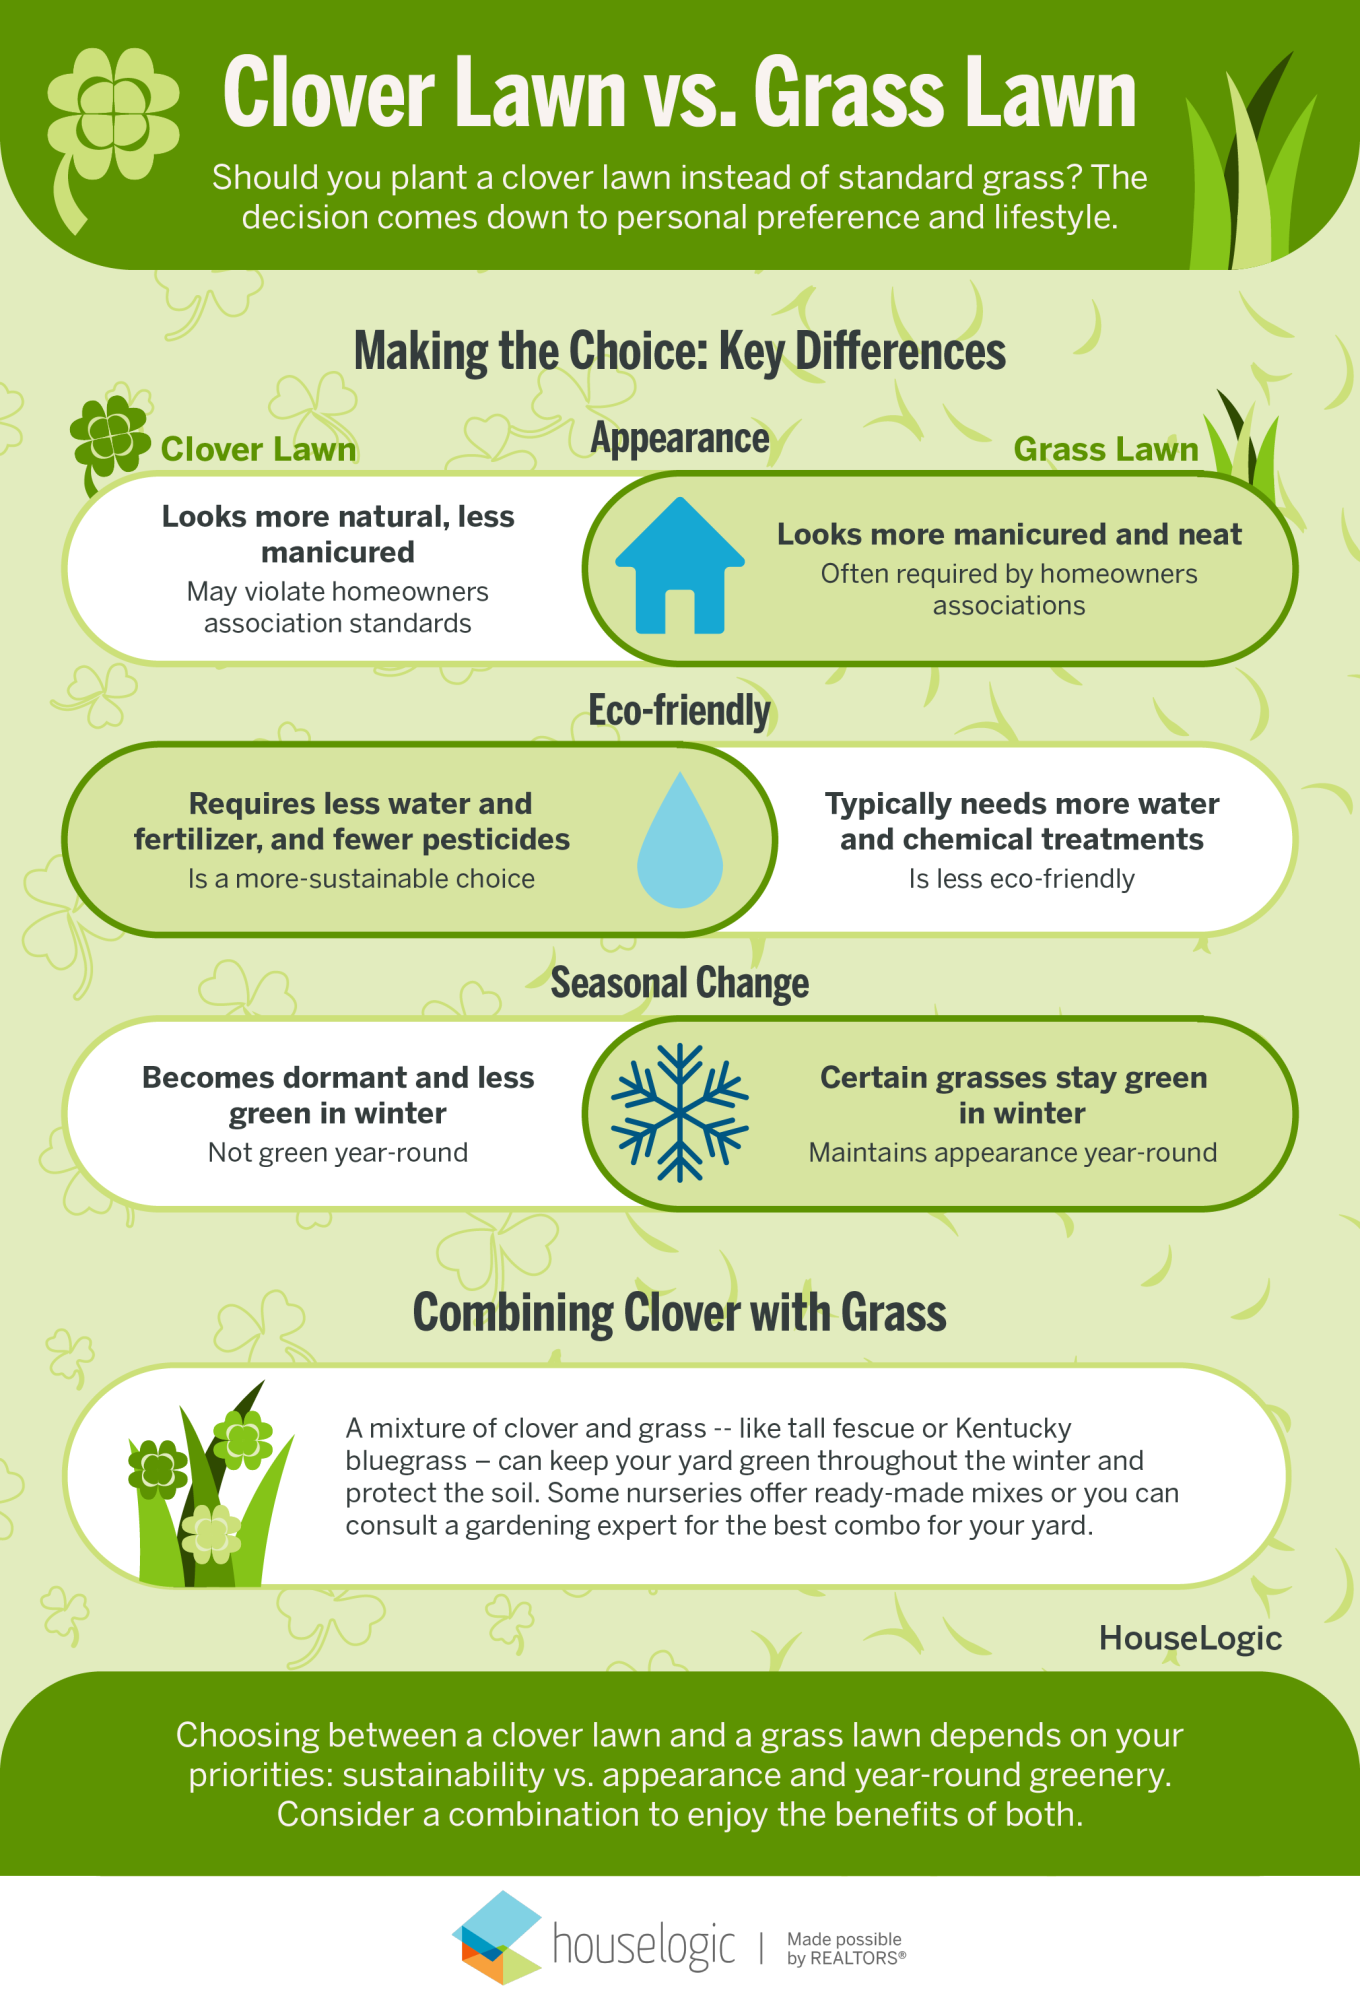 An infographic comparing a clover lawn to a grass lawn and highlighting key differences like what looks natural, how much water is required, and more.